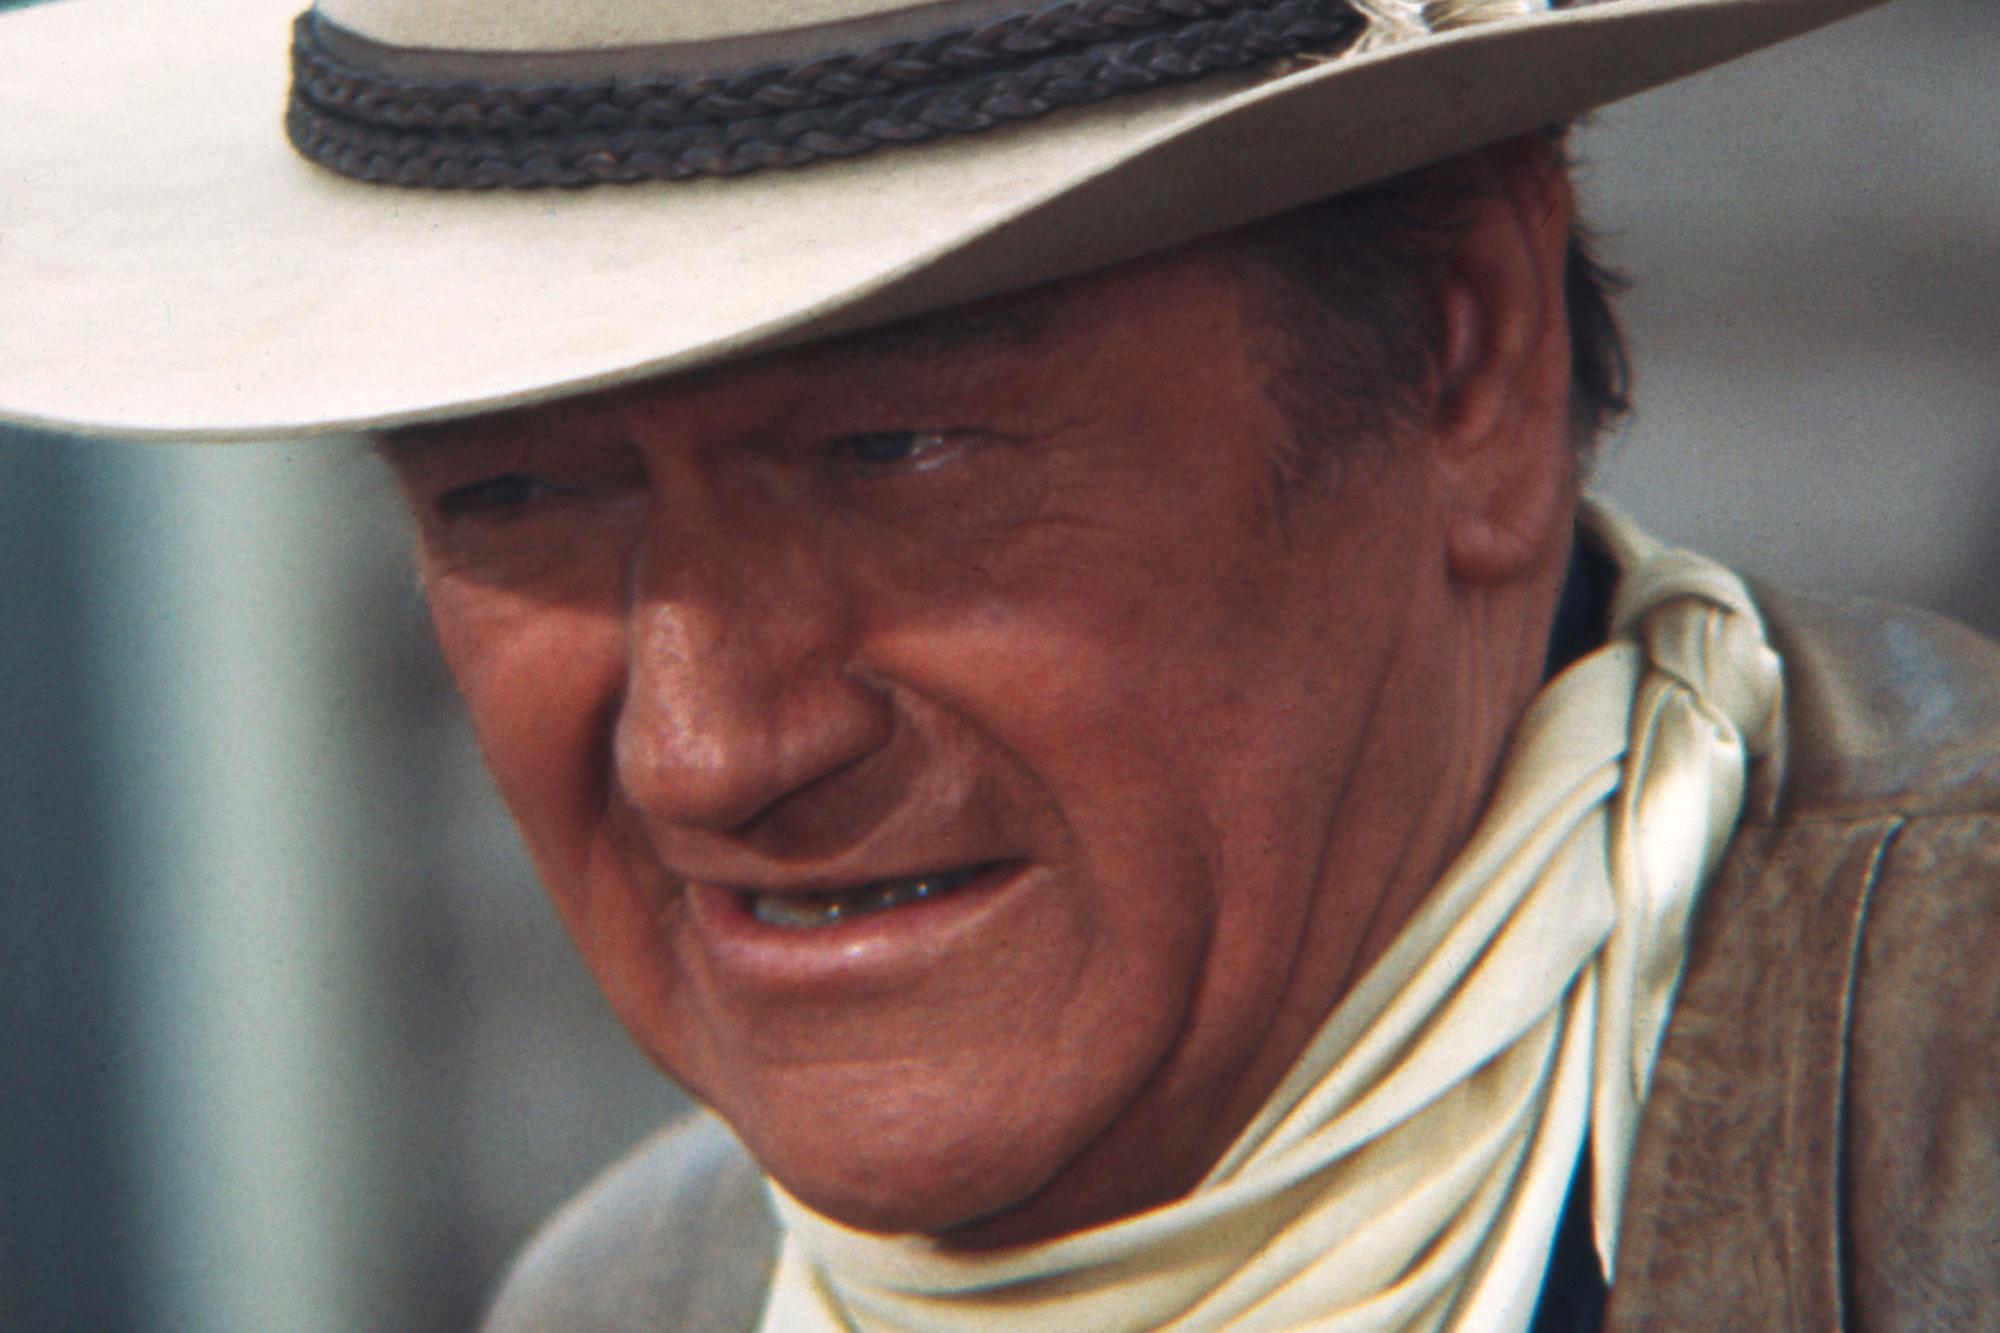 John Wayne, who starred in Western movies. He's wearing a cowboy hat, looking up from under the brim.